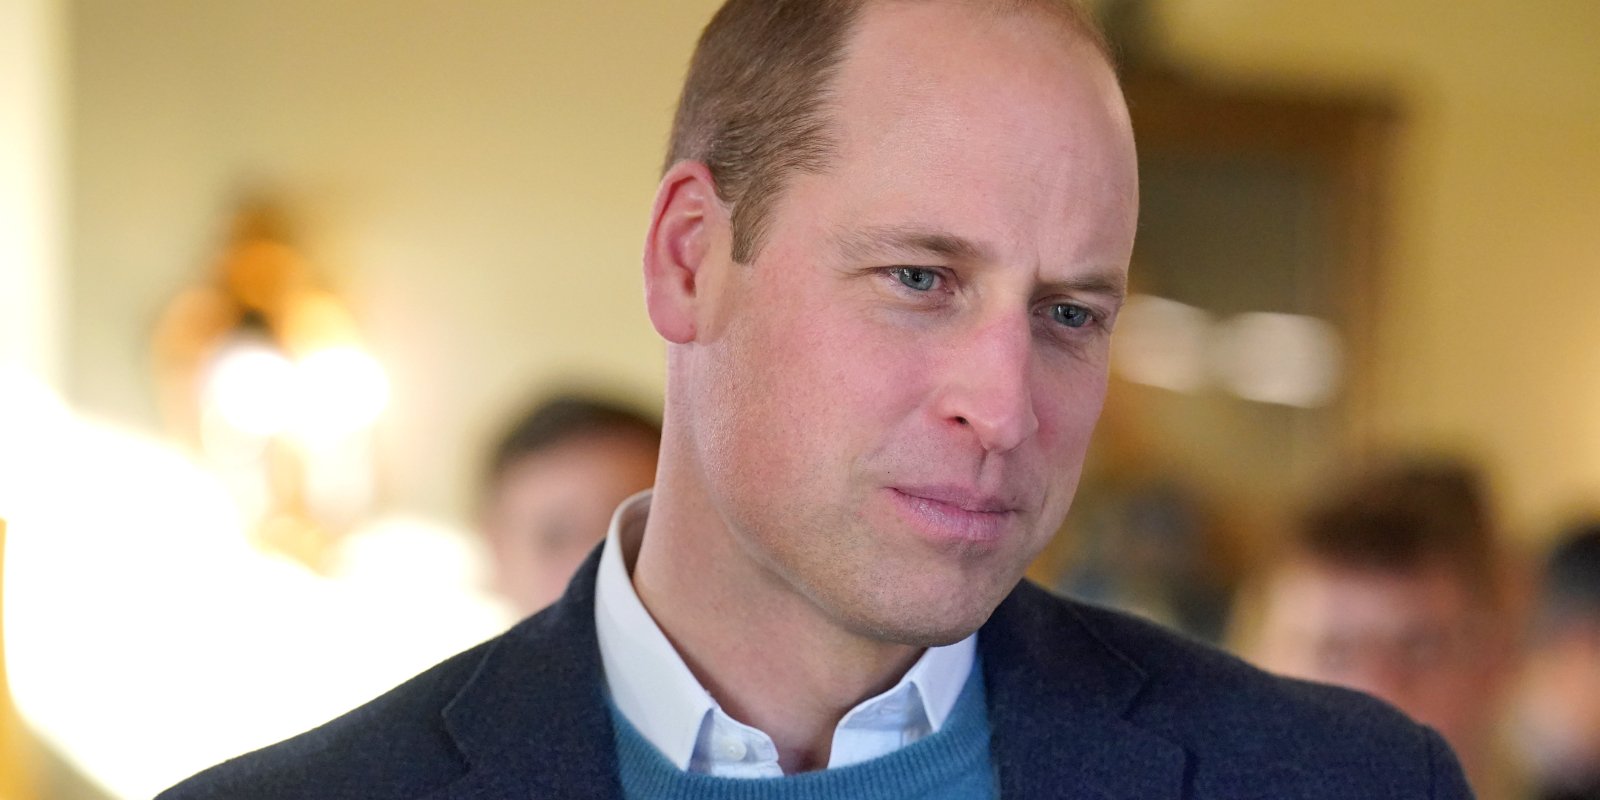 Prince William speaks to the Earthshot Prize 2022 finalists, as he joins them at the Earthshot Prize Fellowship Retreat in Windsor on January 26, 2023 in Windsor, England.